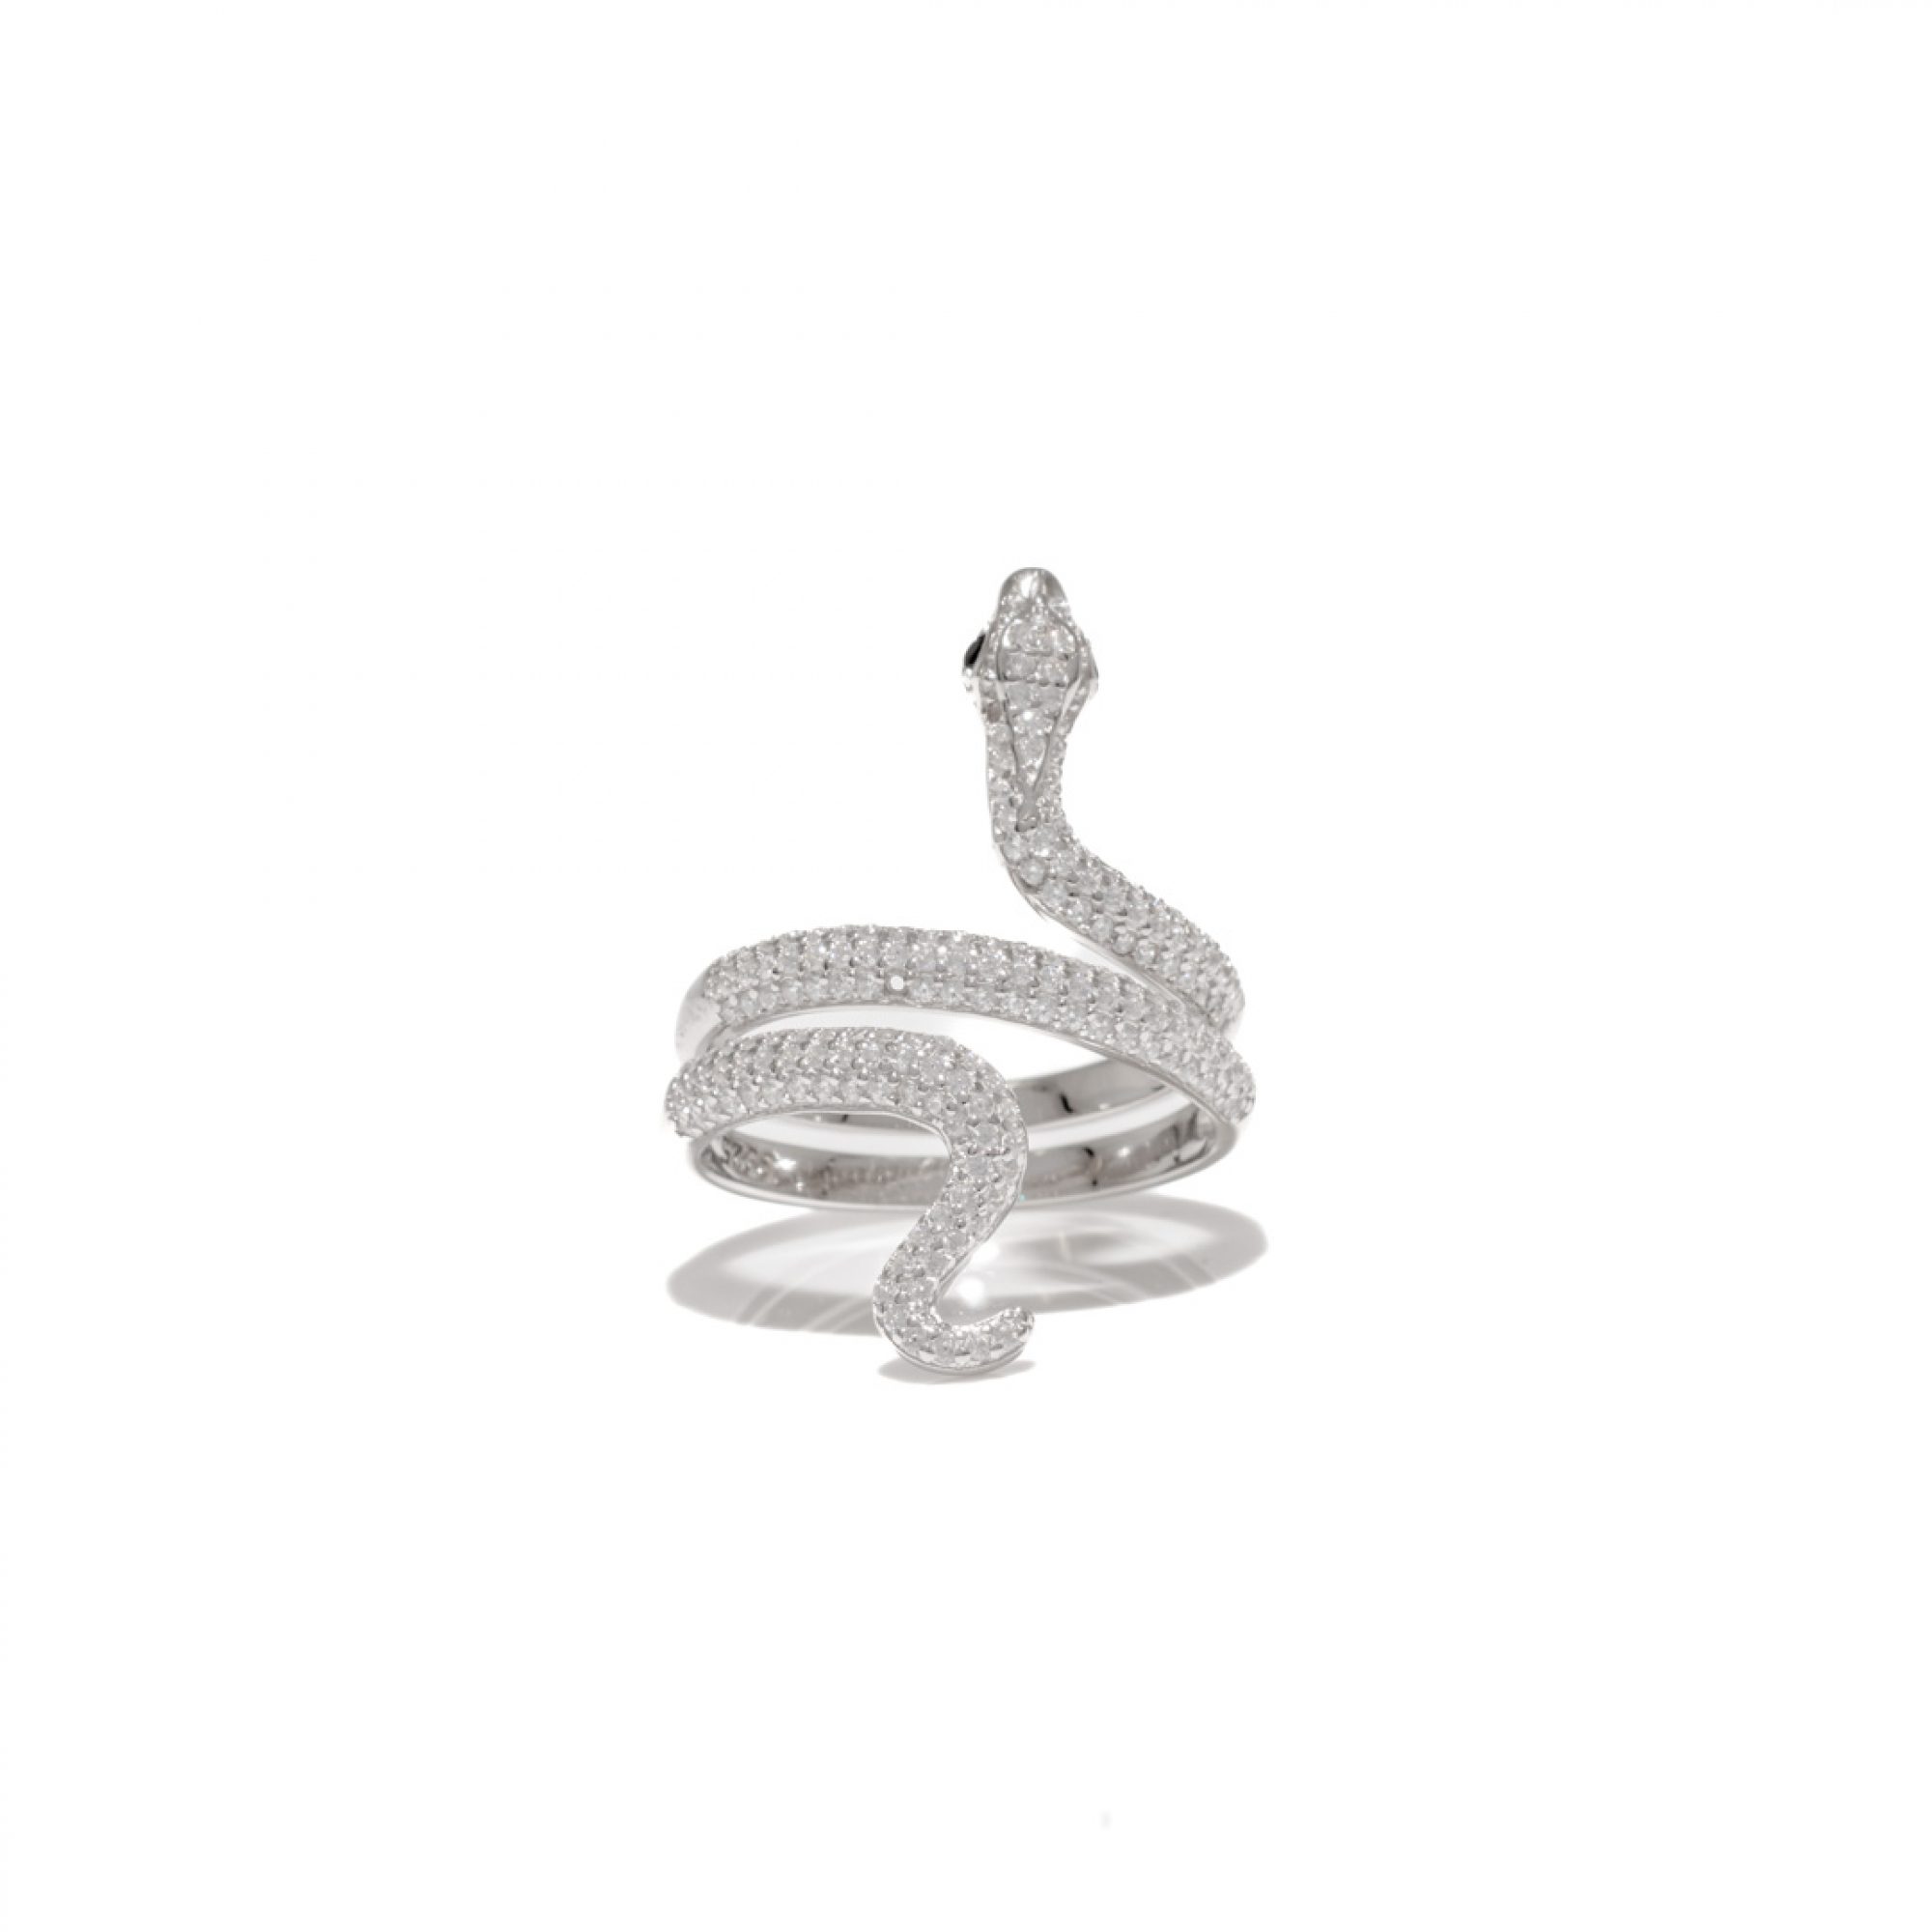 Silver snake ring with zircon stones